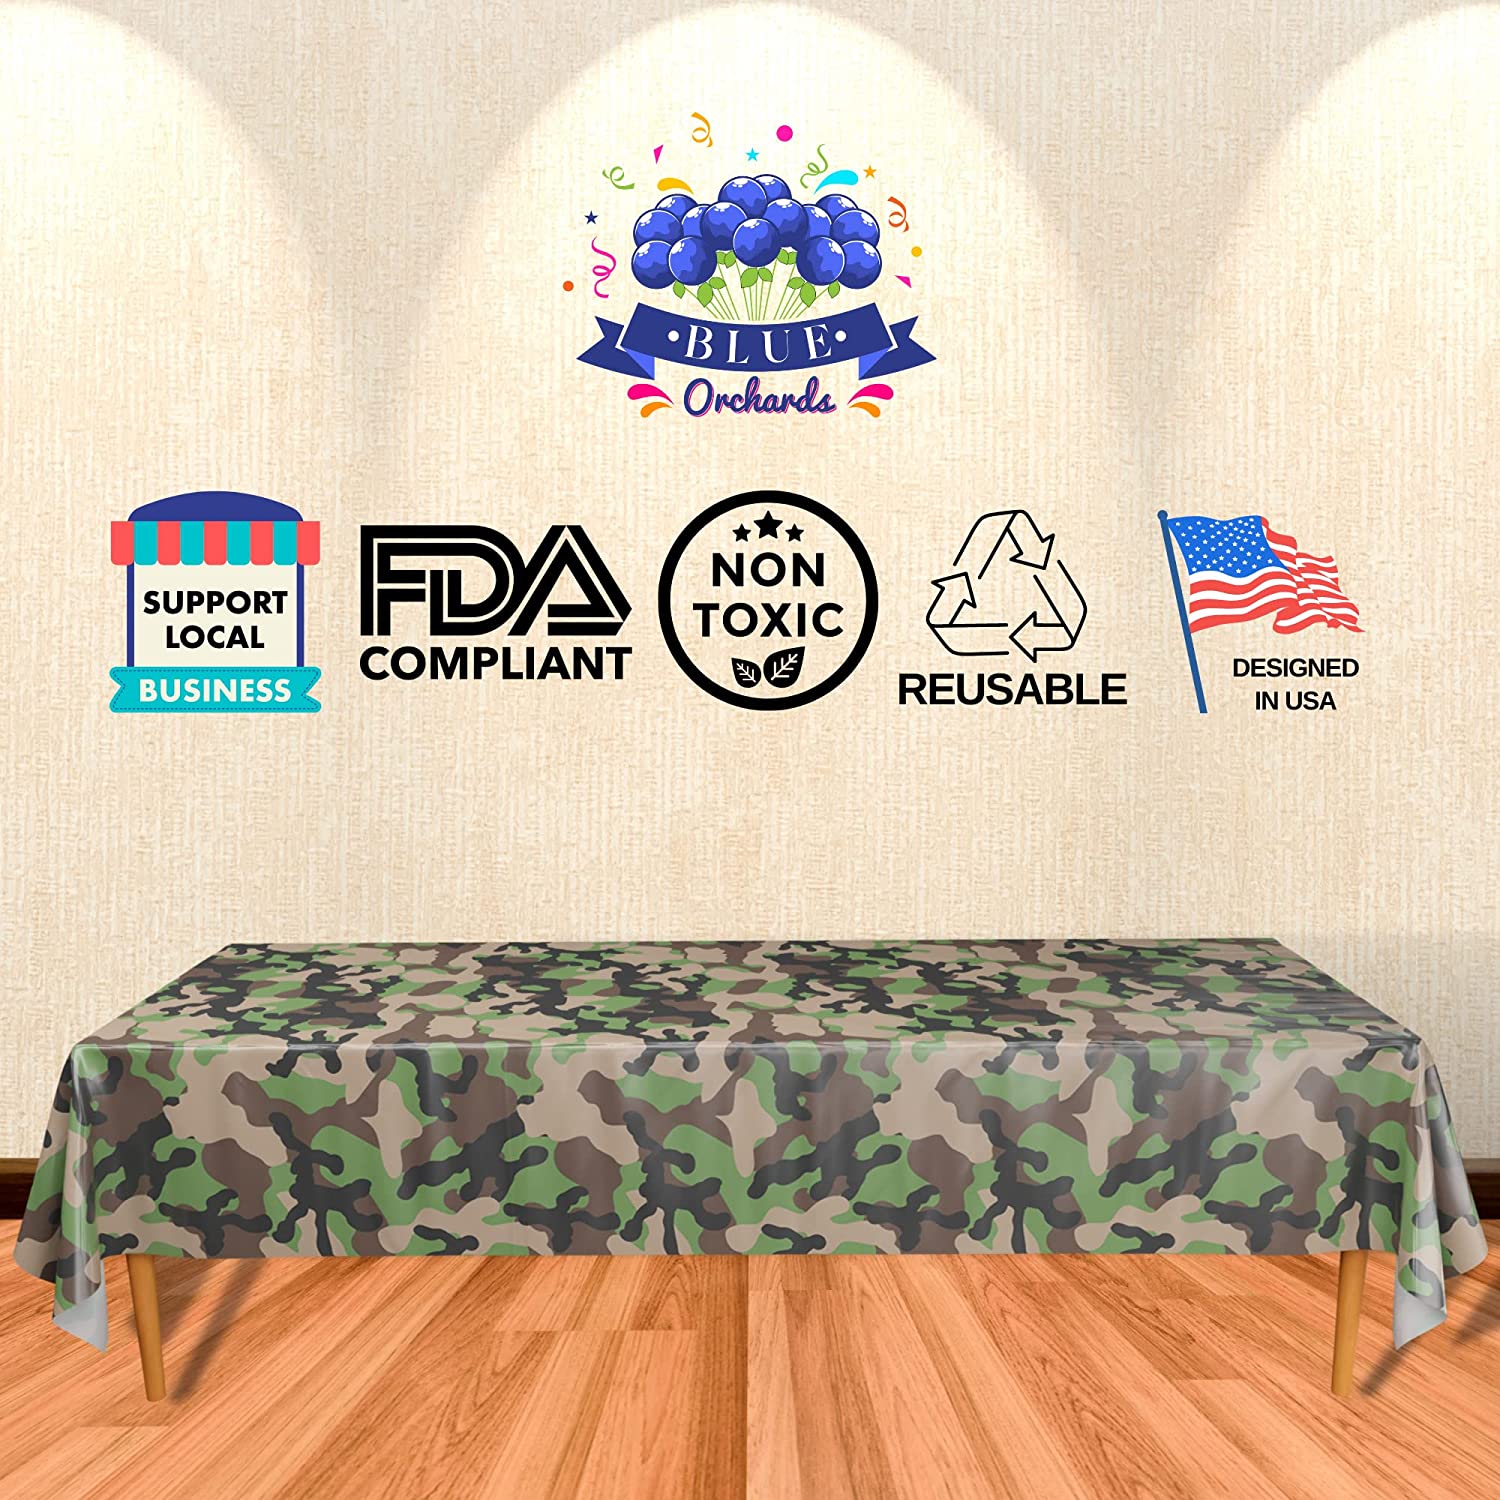 Camo Party Table Covers (Pack of 2) - 54"x108" XL – FDA Compliant, Non Toxic, Reusable, Camouflage Party Supplies, Camo Party Supplies, Camo Plastic Table Cover, Army Table Cover, Camo Theme Party, Army Green Party